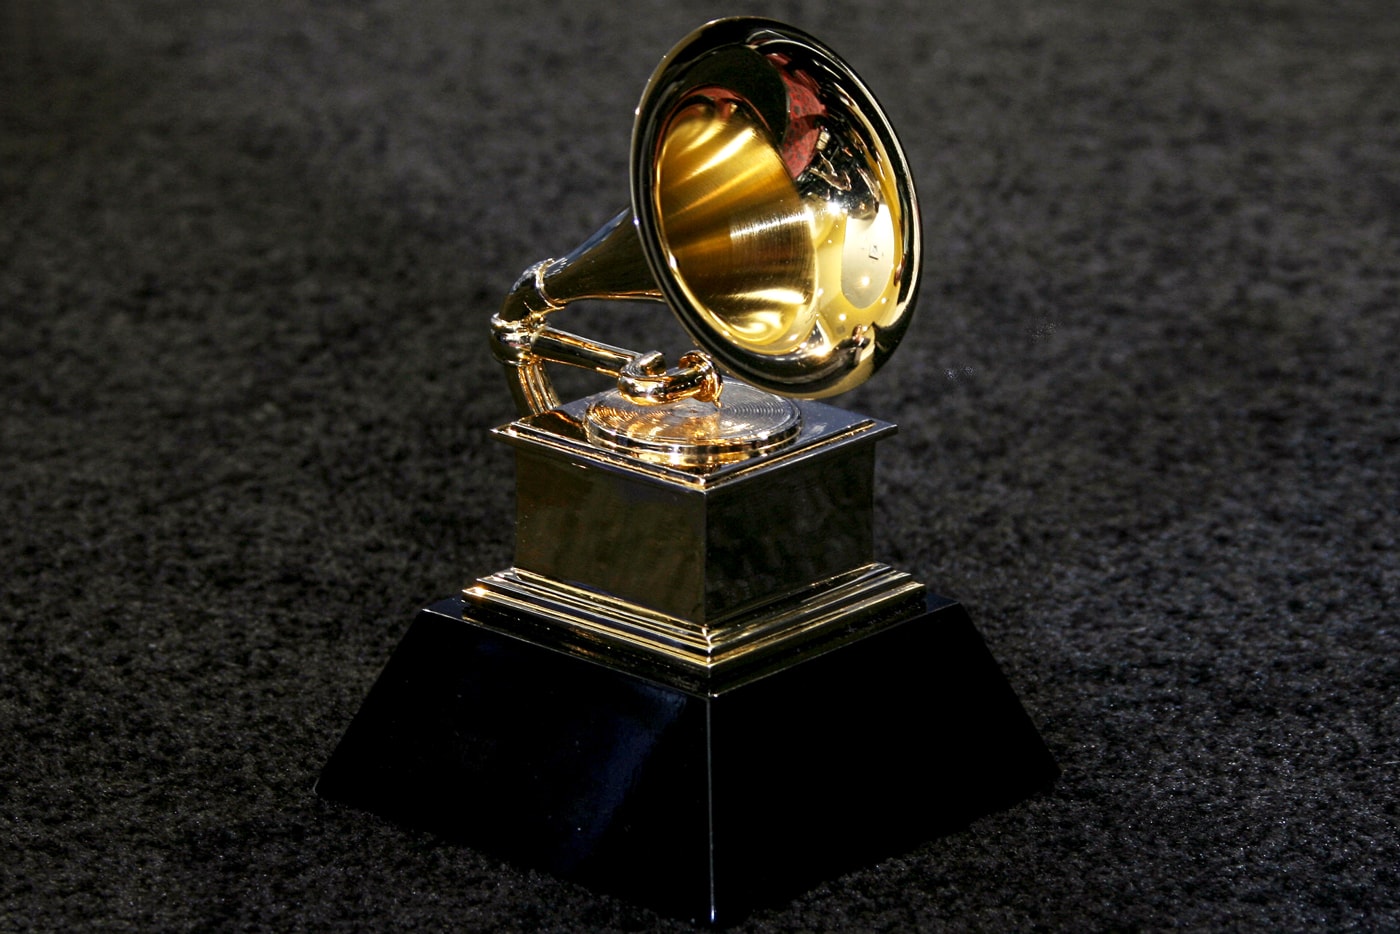 Grammys Close Eligibility Window One Month Early Oscars The Recording Academy